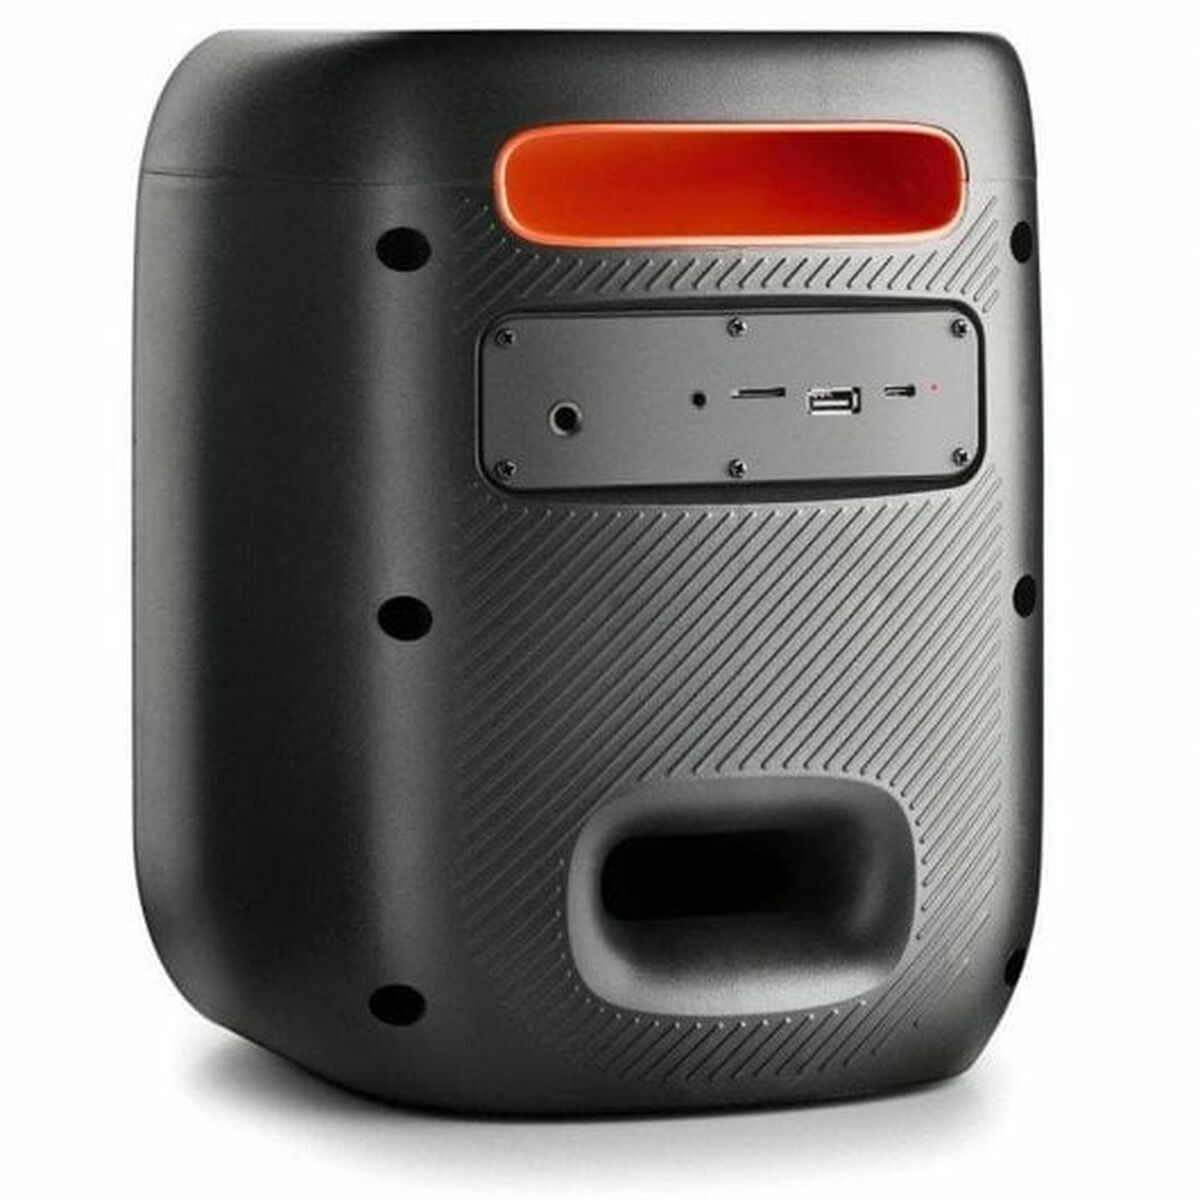 Portable Bluetooth Speakers NGS ELEC-SPK-0836 Black, NGS, Electronics, Audio and Hi-Fi equipment, portable-bluetooth-speakers-ngs-elec-spk-0836-black, Brand_NGS, category-reference-2609, category-reference-2637, category-reference-2882, category-reference-t-19653, category-reference-t-7441, category-reference-t-7442, category-reference-t-7450, cinema and television, Condition_NEW, entertainment, music, Price_50 - 100, Teleworking, RiotNook